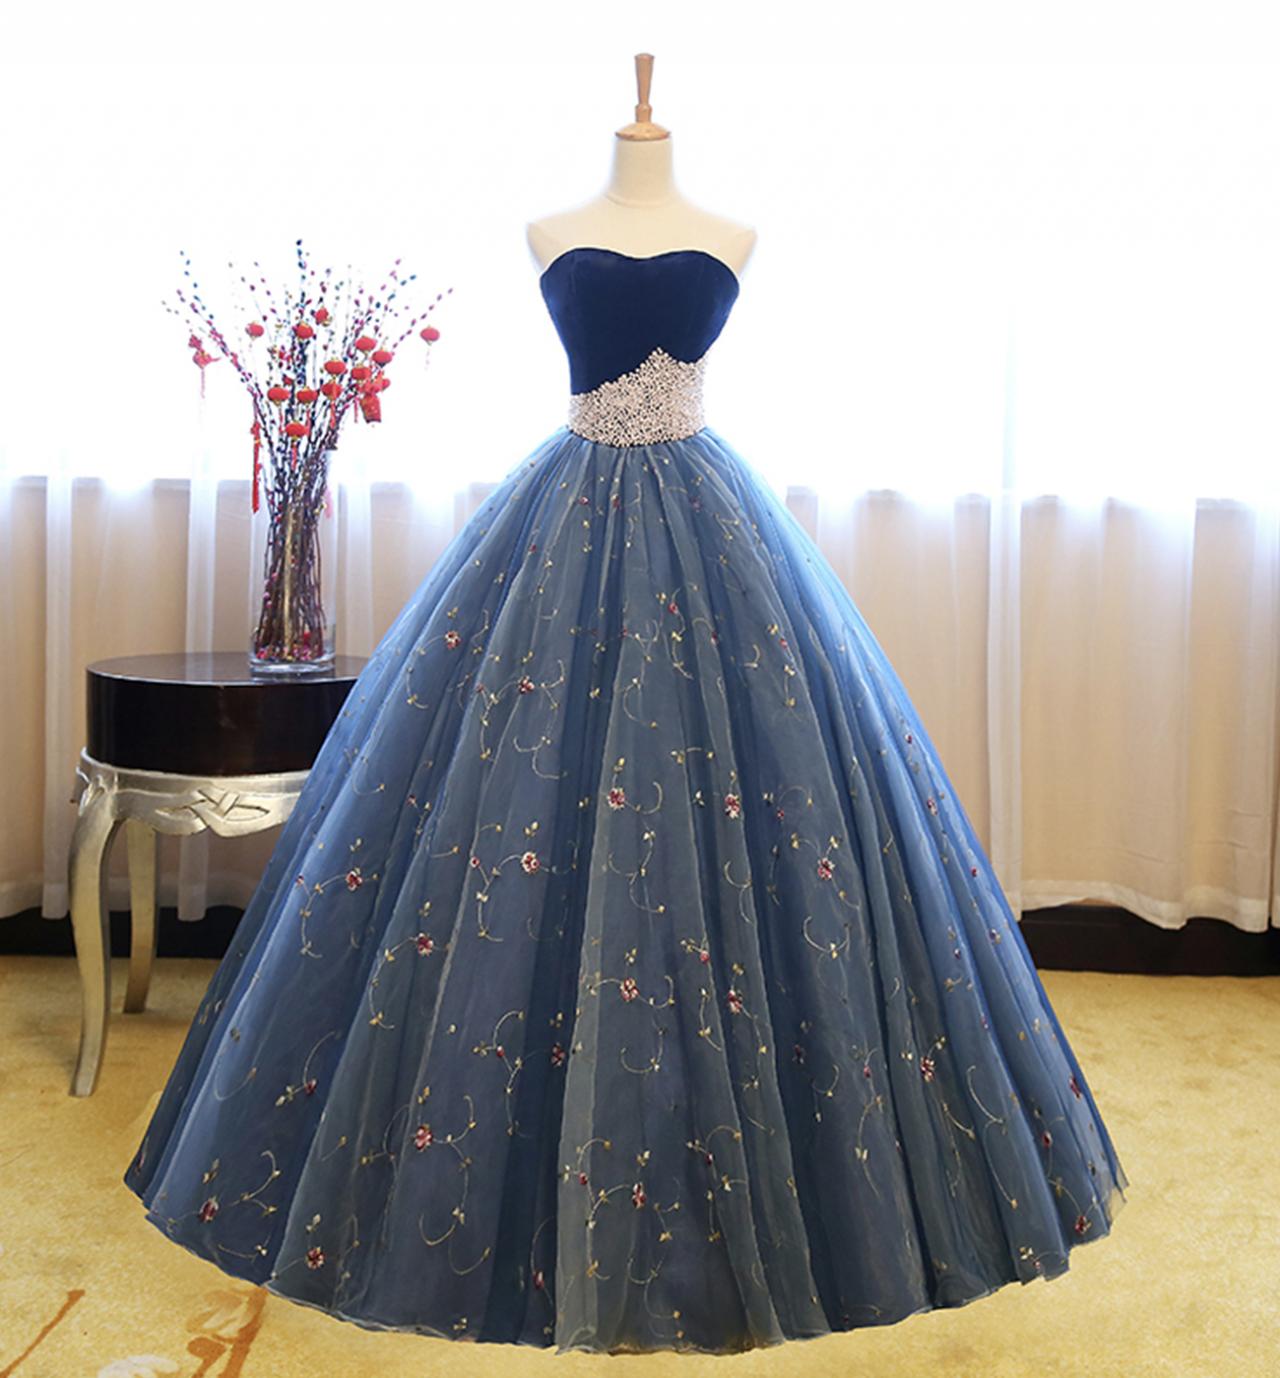 Blue Tulle Lace Long Ball Gown Dress Blue Evening Dress